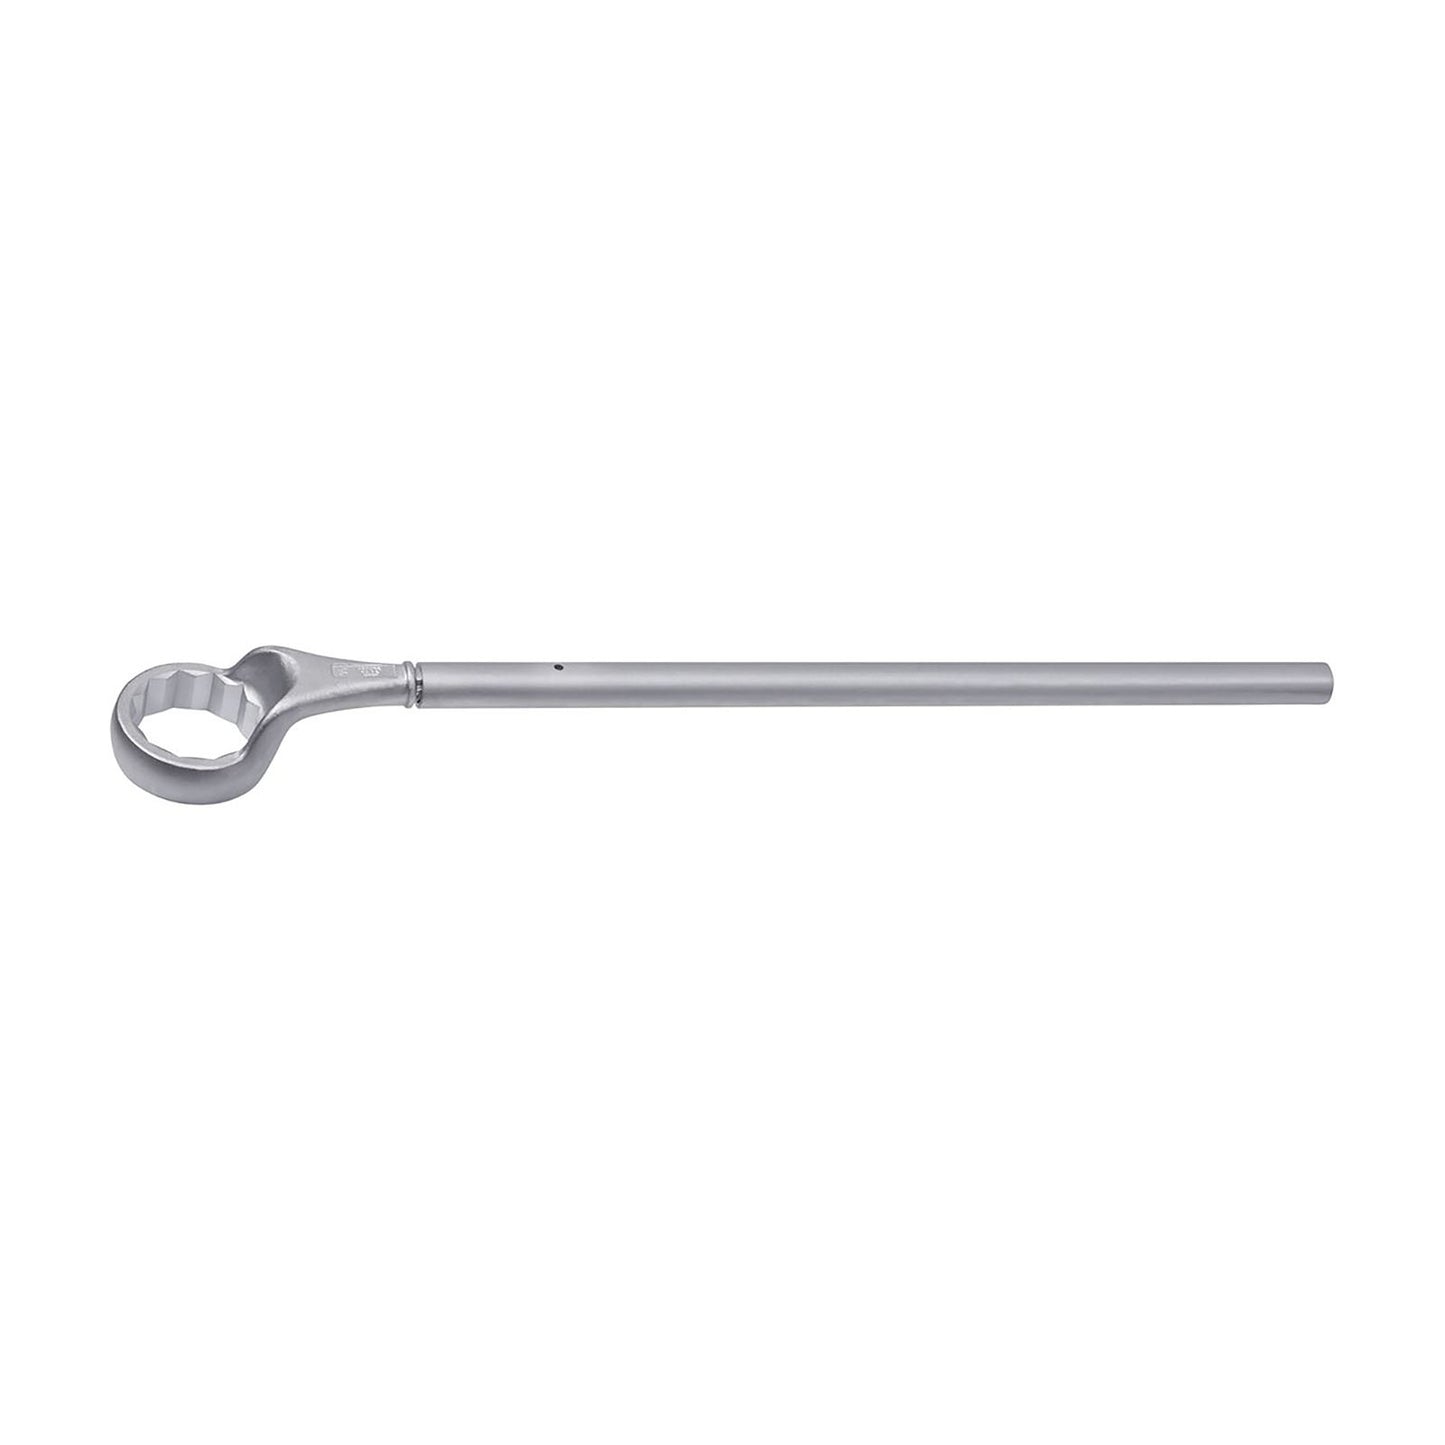 GEDORE 2 A 60 - Traction Wrench, 60mm (6034730)